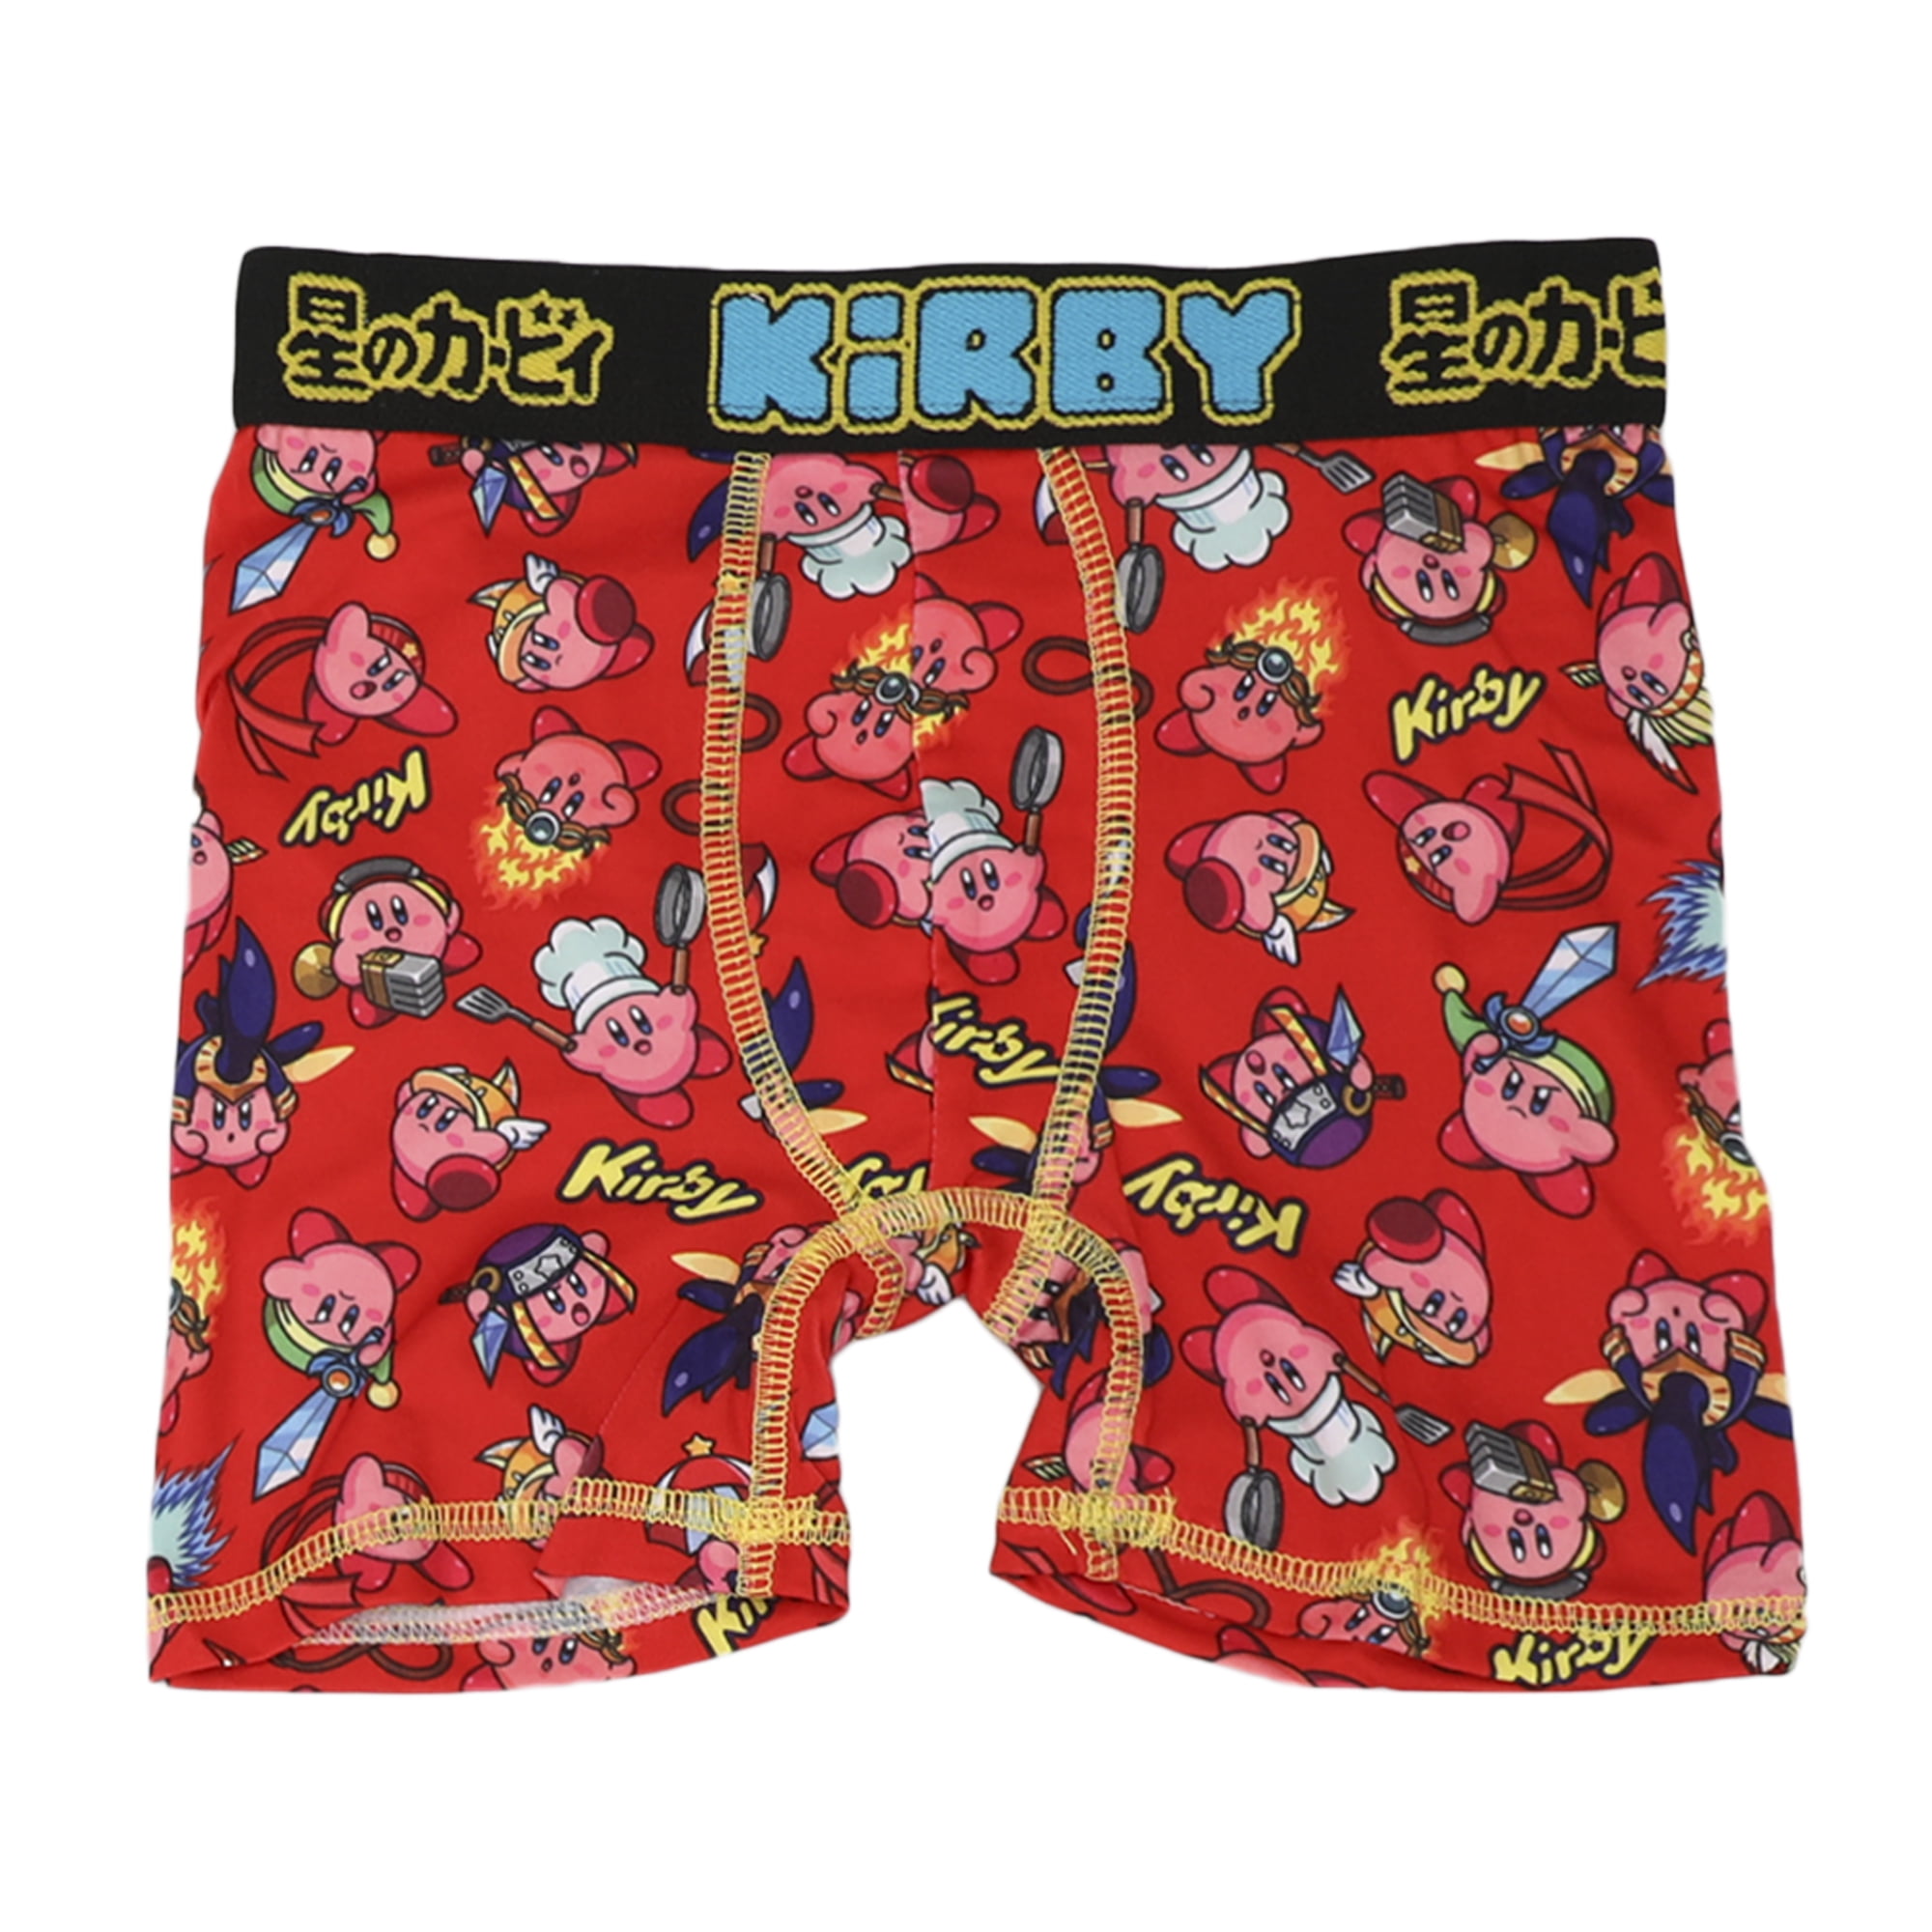  Kirby Men's Boxer Shorts, Boxer Briefs, Front Closure,  Underwear, Men's, Moisture Absorbent, Quick Drying, Breathable, Sweat  Absorbent, Antibacterial, Odor Resistant, Stylish, Underwear, All Seasons,  : Home & Kitchen